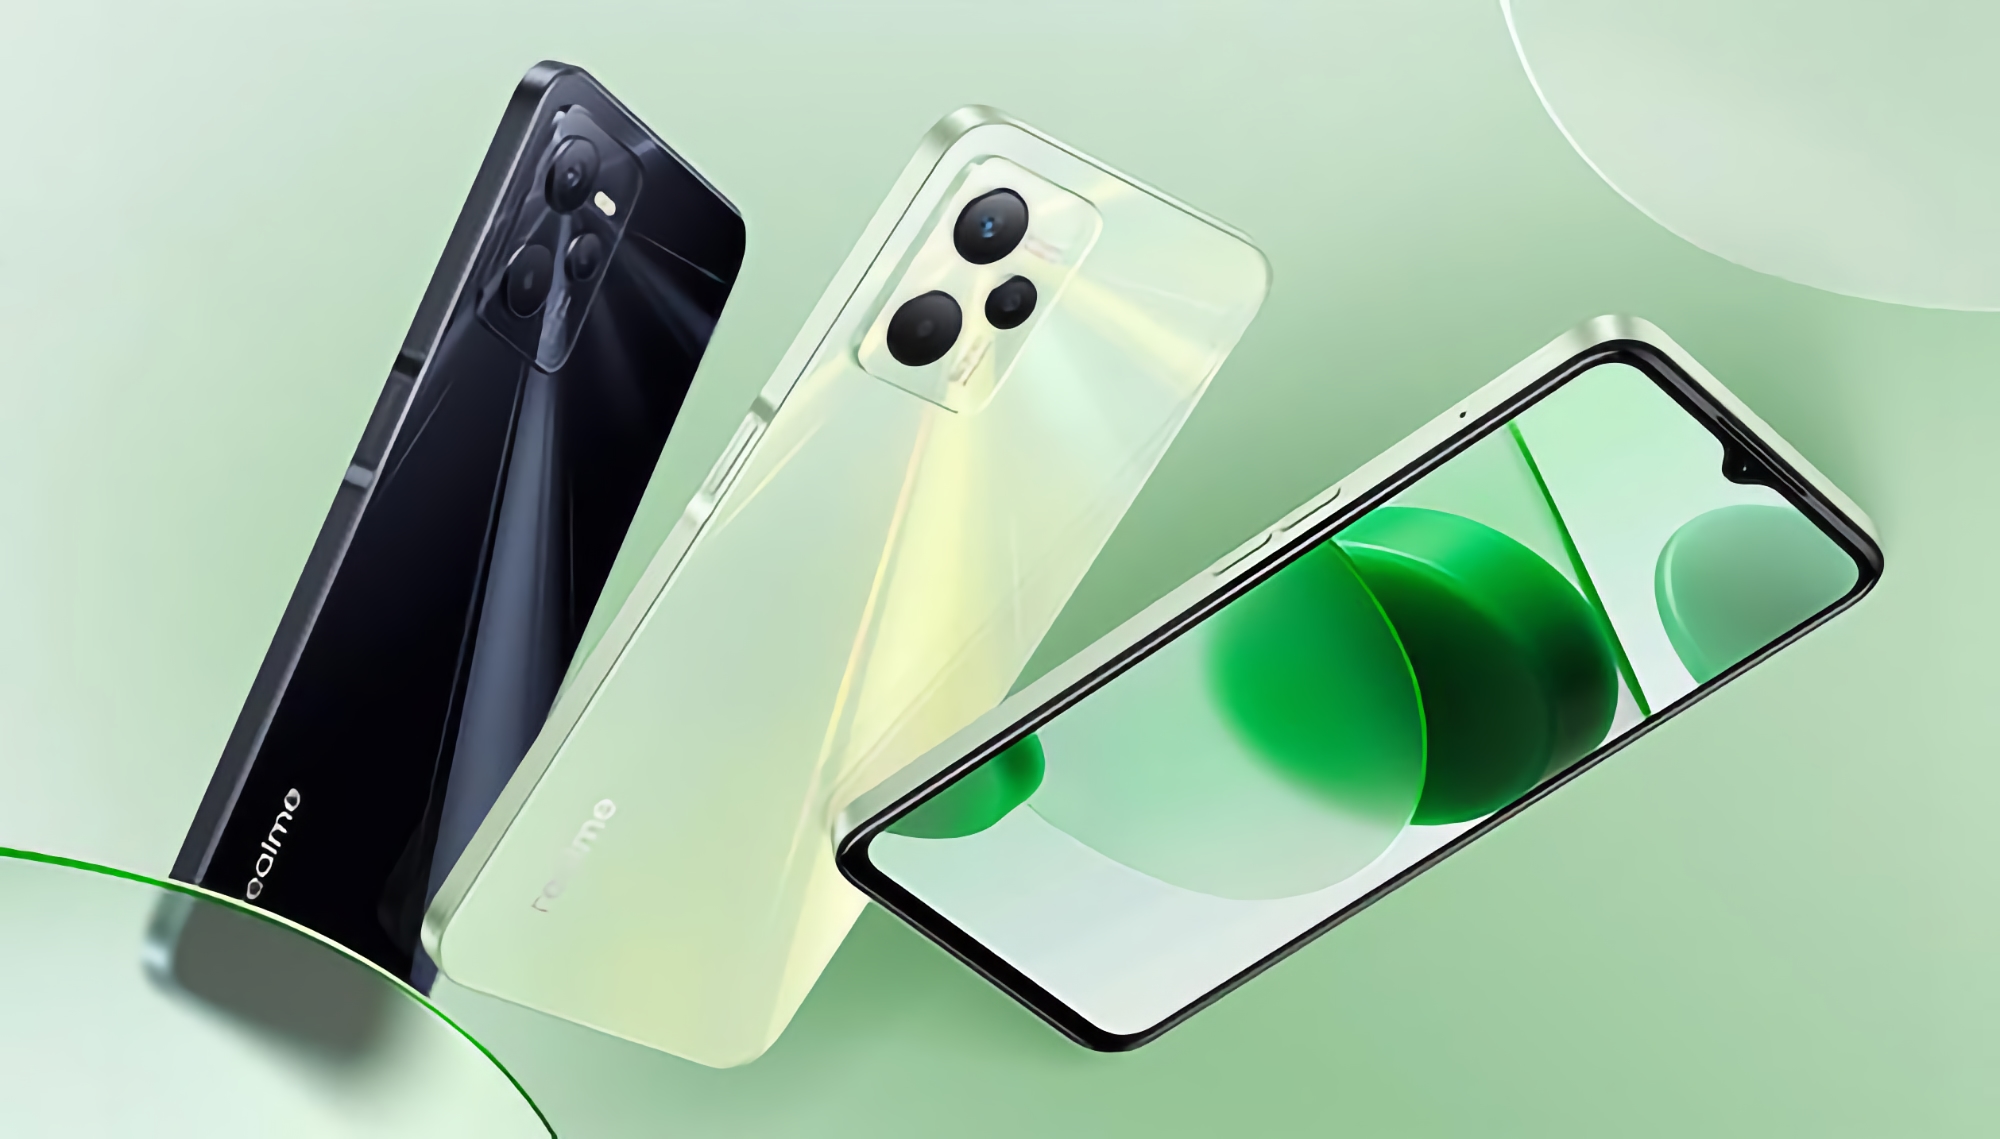 6.6" screen, 50 MP camera, 5000 mAh battery and price less than $180: realme C35 images and details leaked online